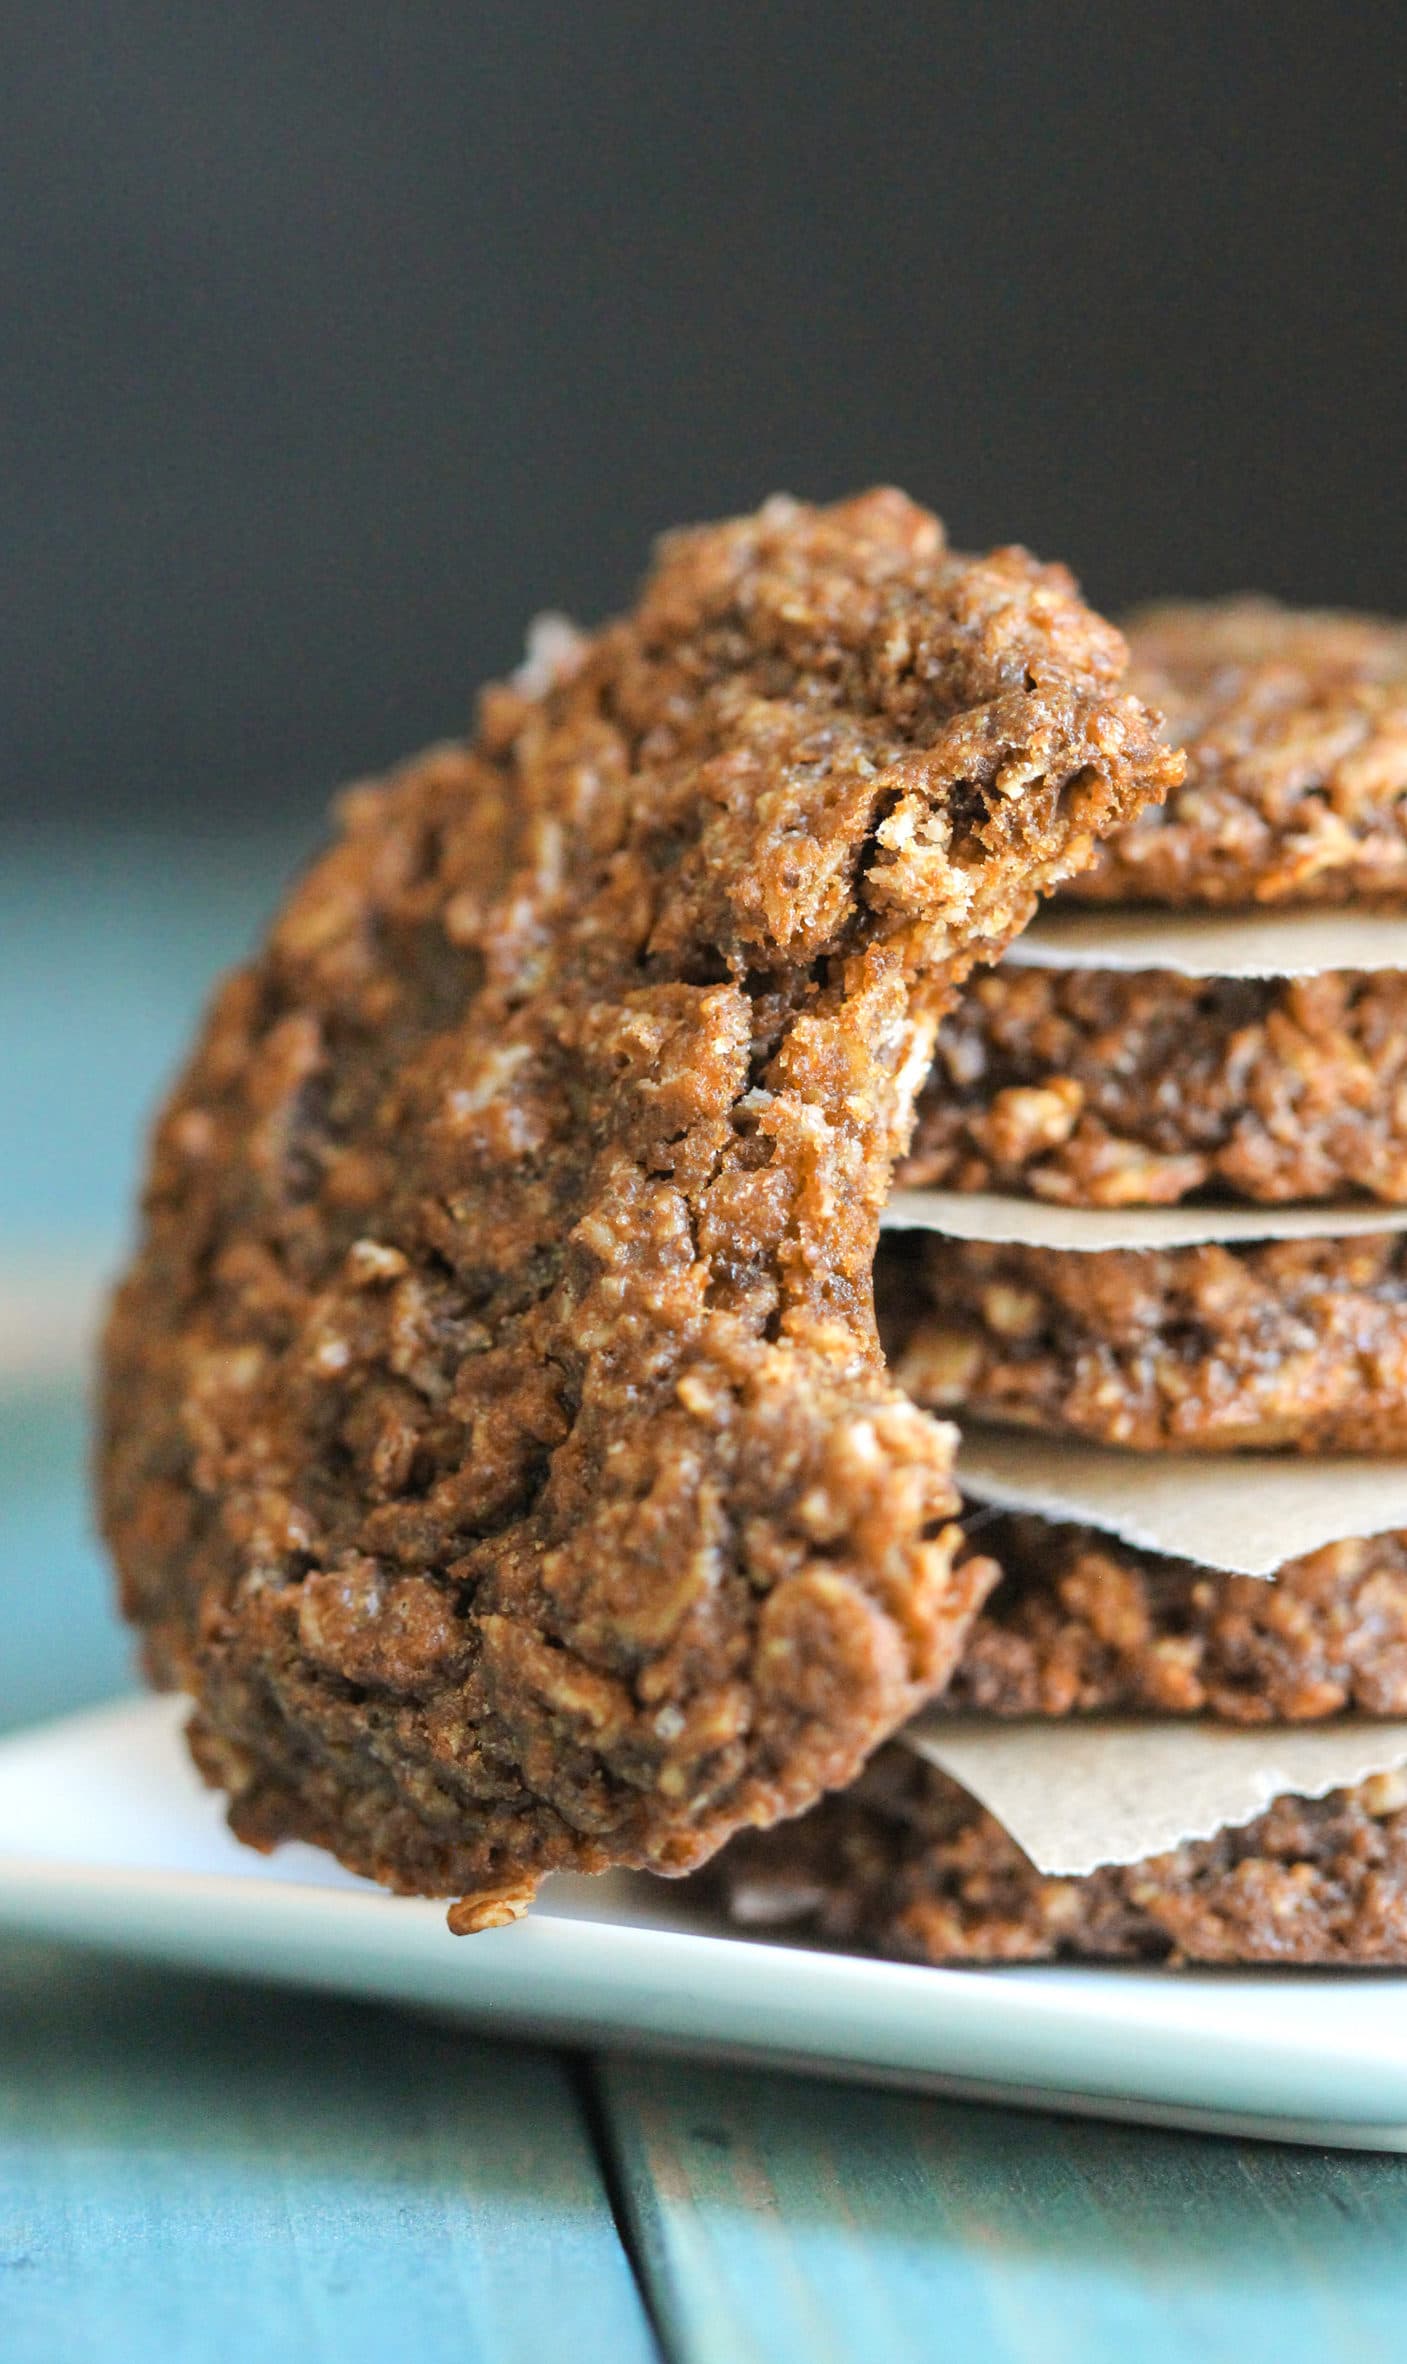 Healthy Chewy Peanut Butter Oatmeal Cookies recipe! These secretly guilt-free cookies are refined sugar free, gluten free, dairy free, eggless, and vegan, but you would never ever EVER suspect it! Healthy Dessert Recipes at Desserts with Benefits